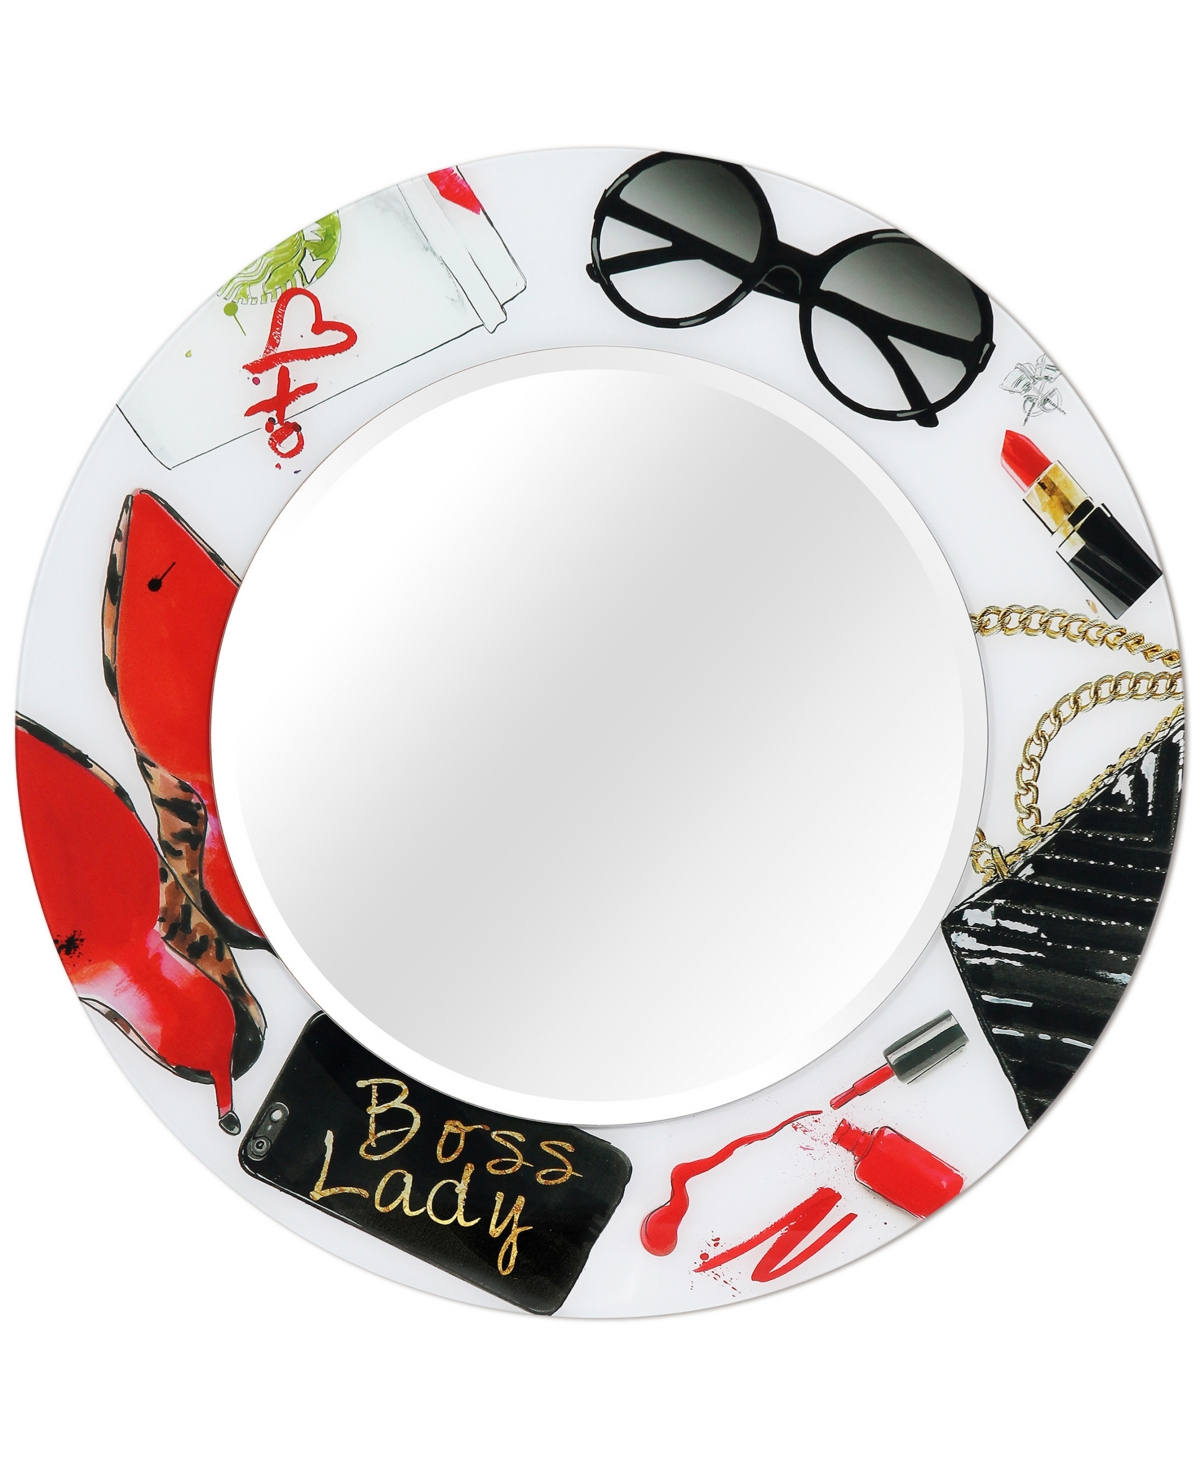 Boss Lady Round Beveled Wall Mirror on Free Floating Reverse Printed Tempered Art Glass, 36" x 36" x 0.4" - Multi